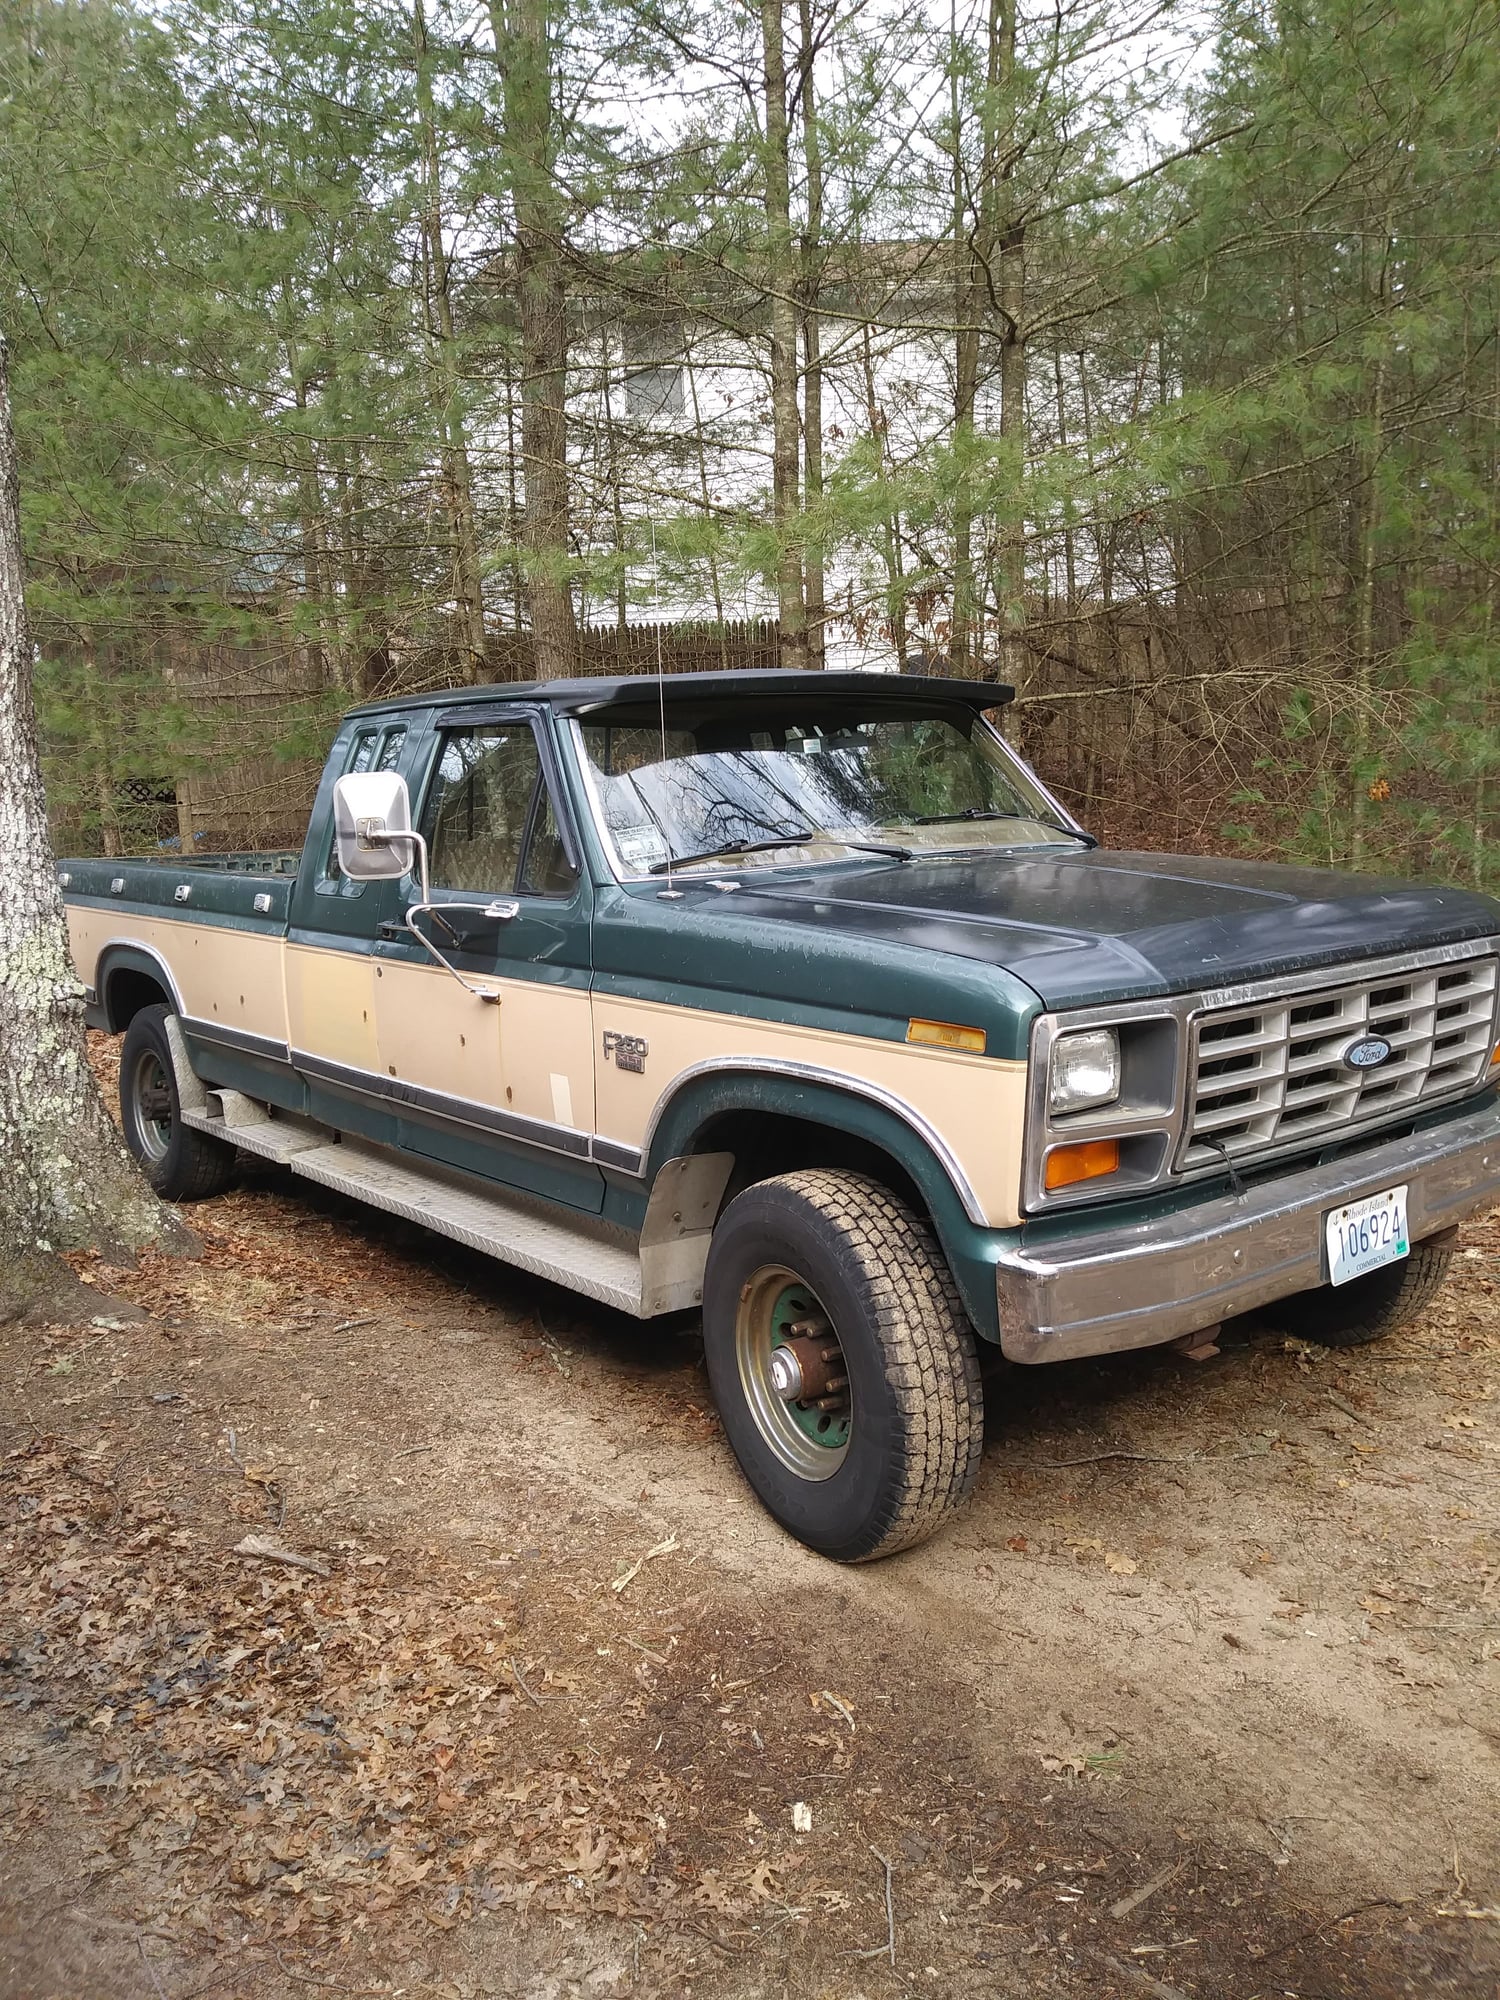 1986 Ford F-250 - 1986 Ford F250 XLT Lariat king cab long bed 4x4 diesel - Used - VIN 1fthx2619gkb86596 - 106,103 Miles - 8 cyl - 4WD - Automatic - Truck - Other - Richmond, RI 02832, United States